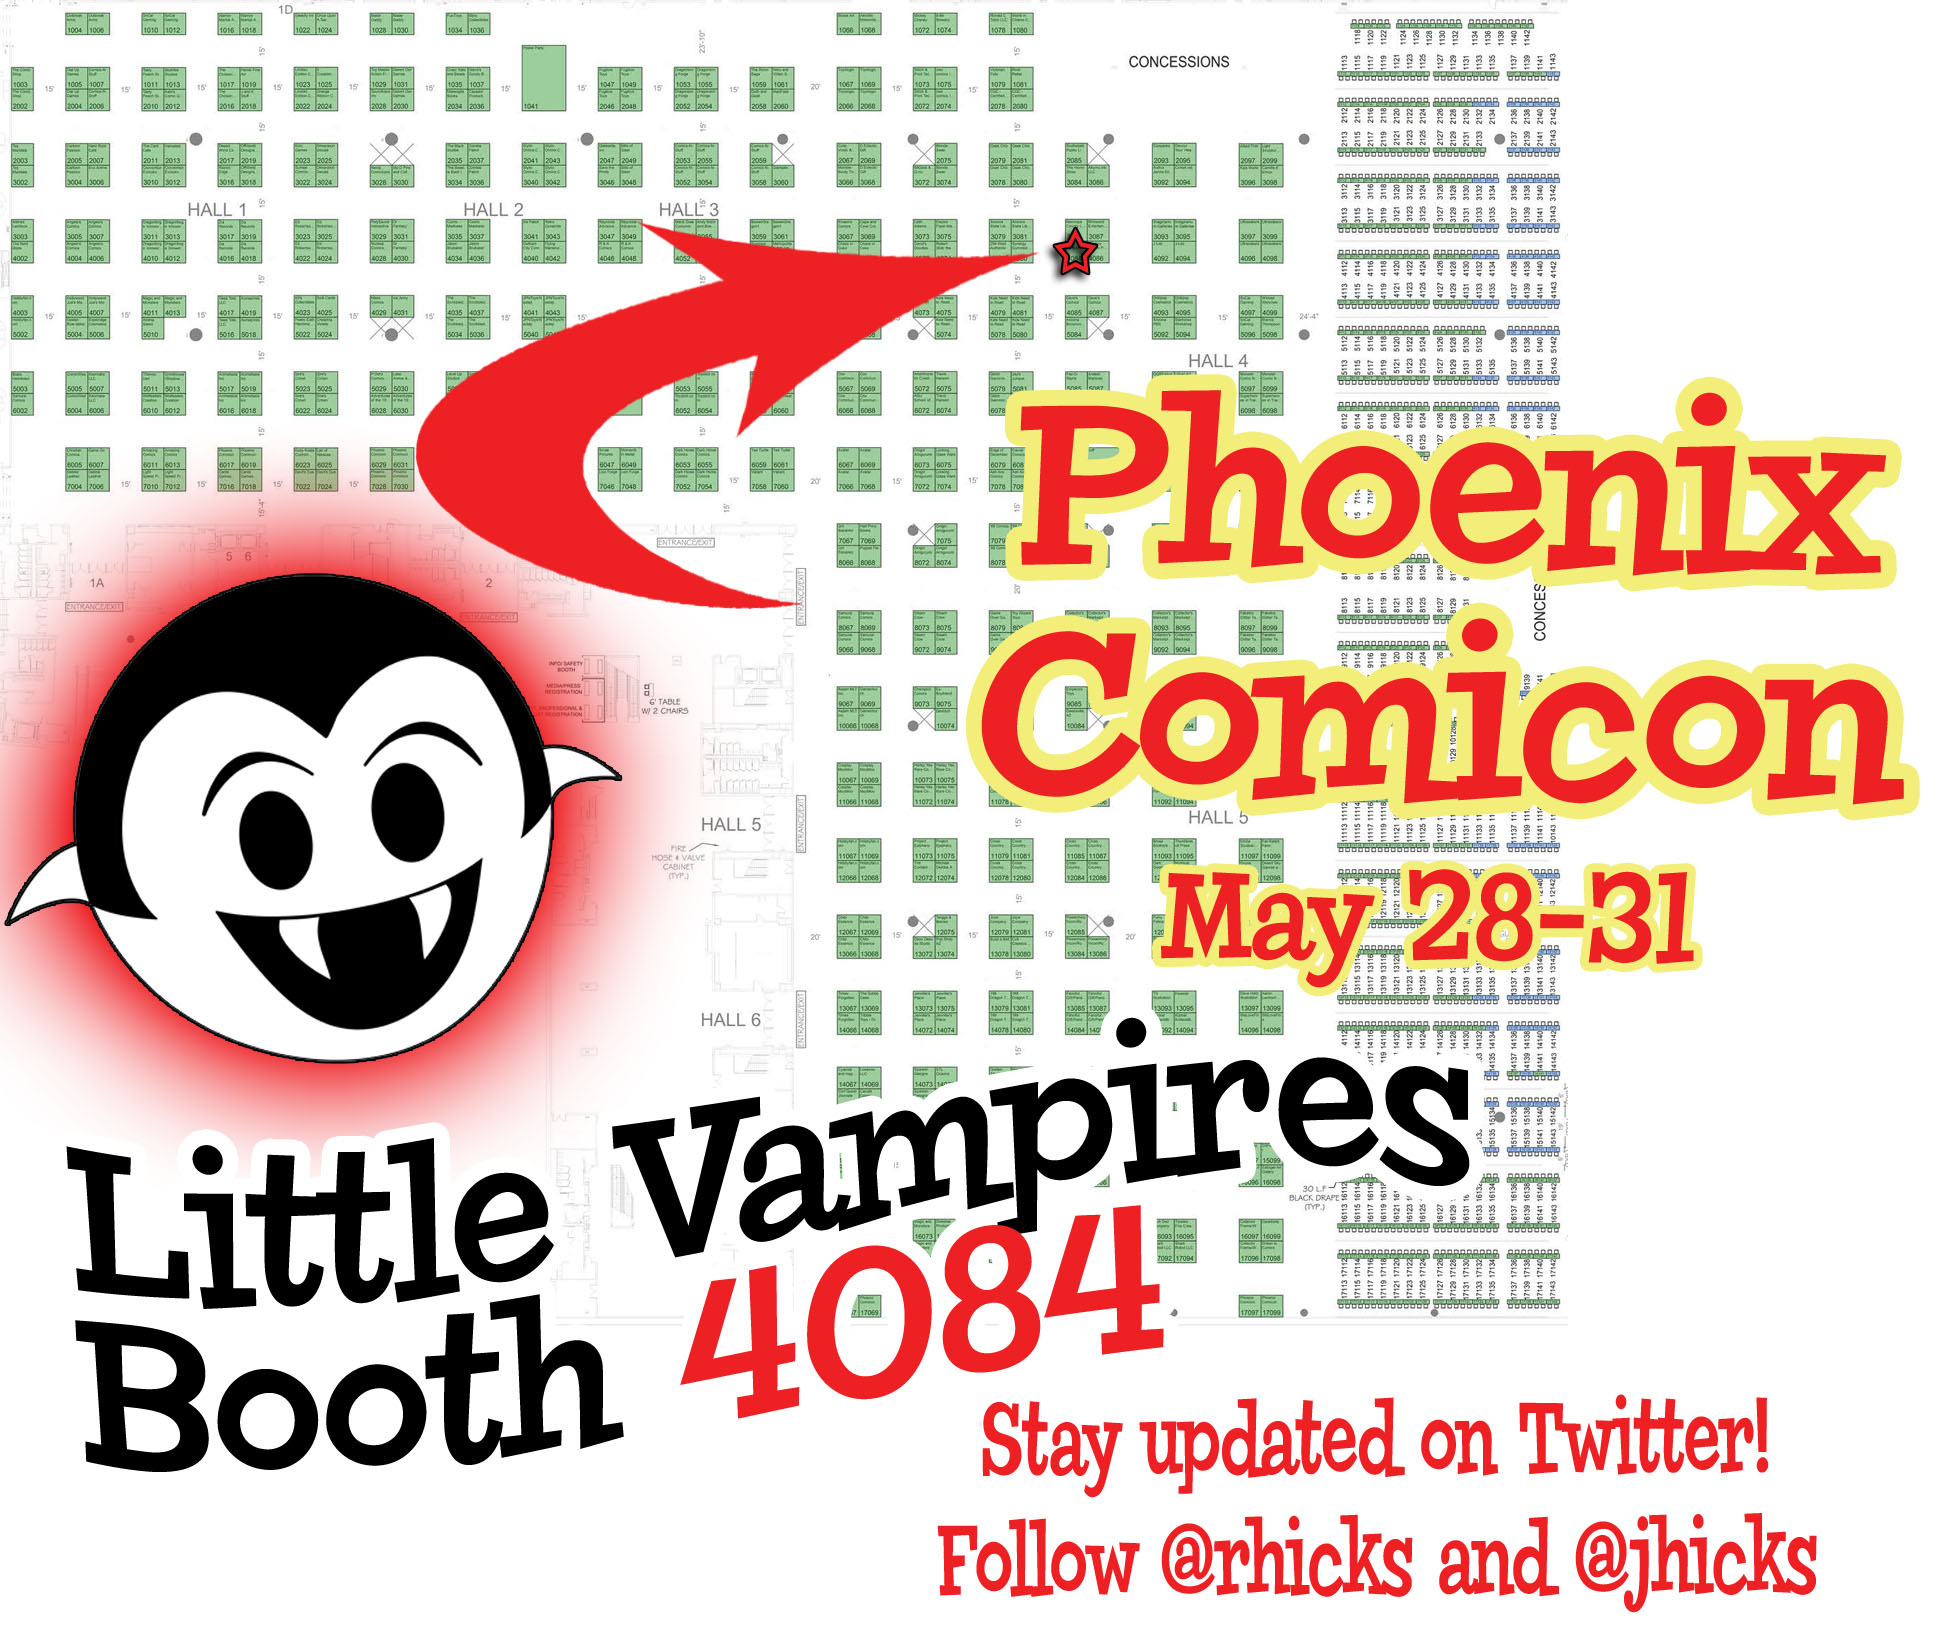 Phoenix Comicon 2015 exhibitor floor map with the Little Vampires booth highlighted